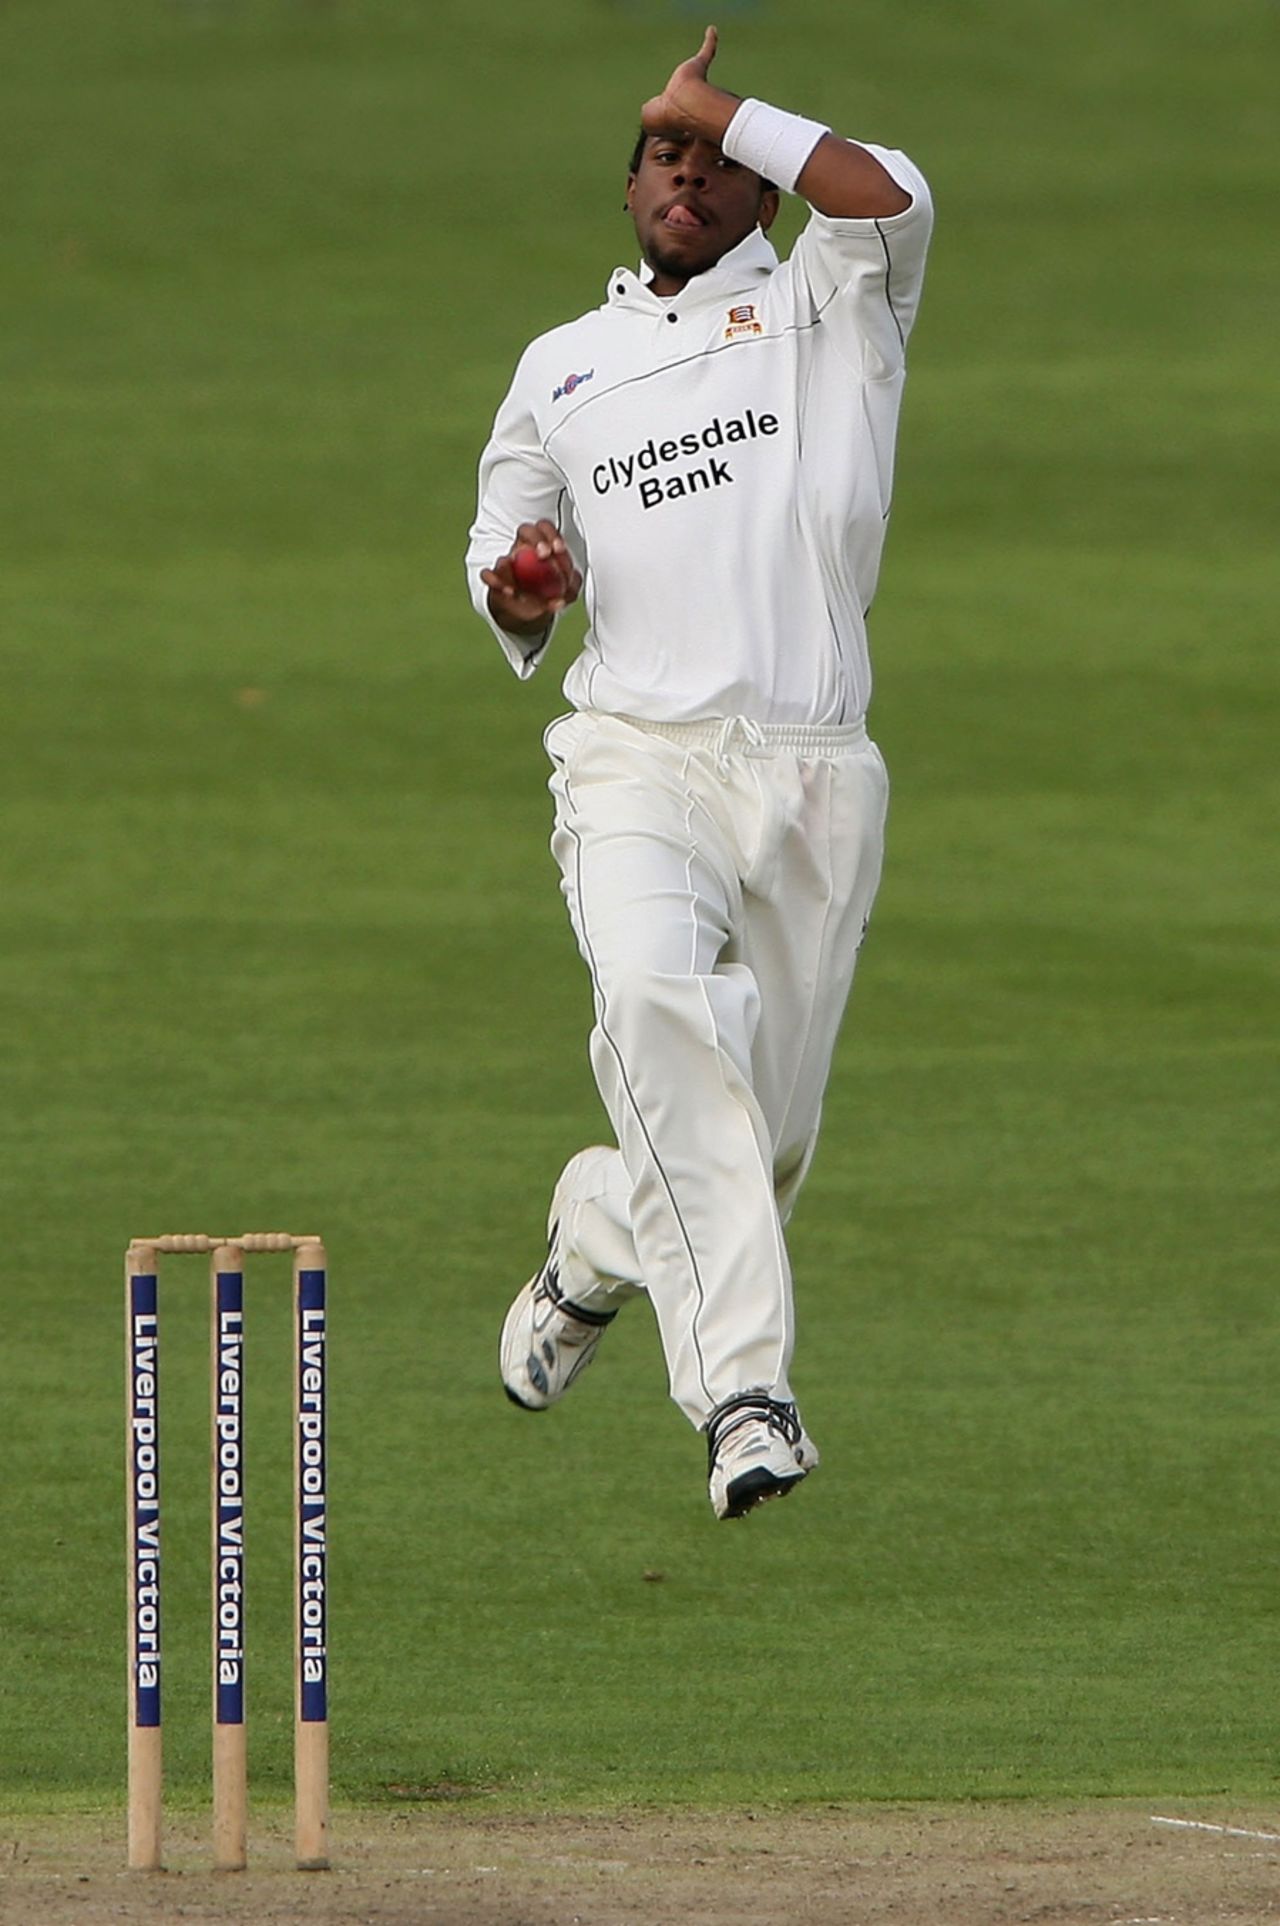 Mervyn Westfield poised to let rip, Worcestershire v Essex, County Championship, August 30, 2006